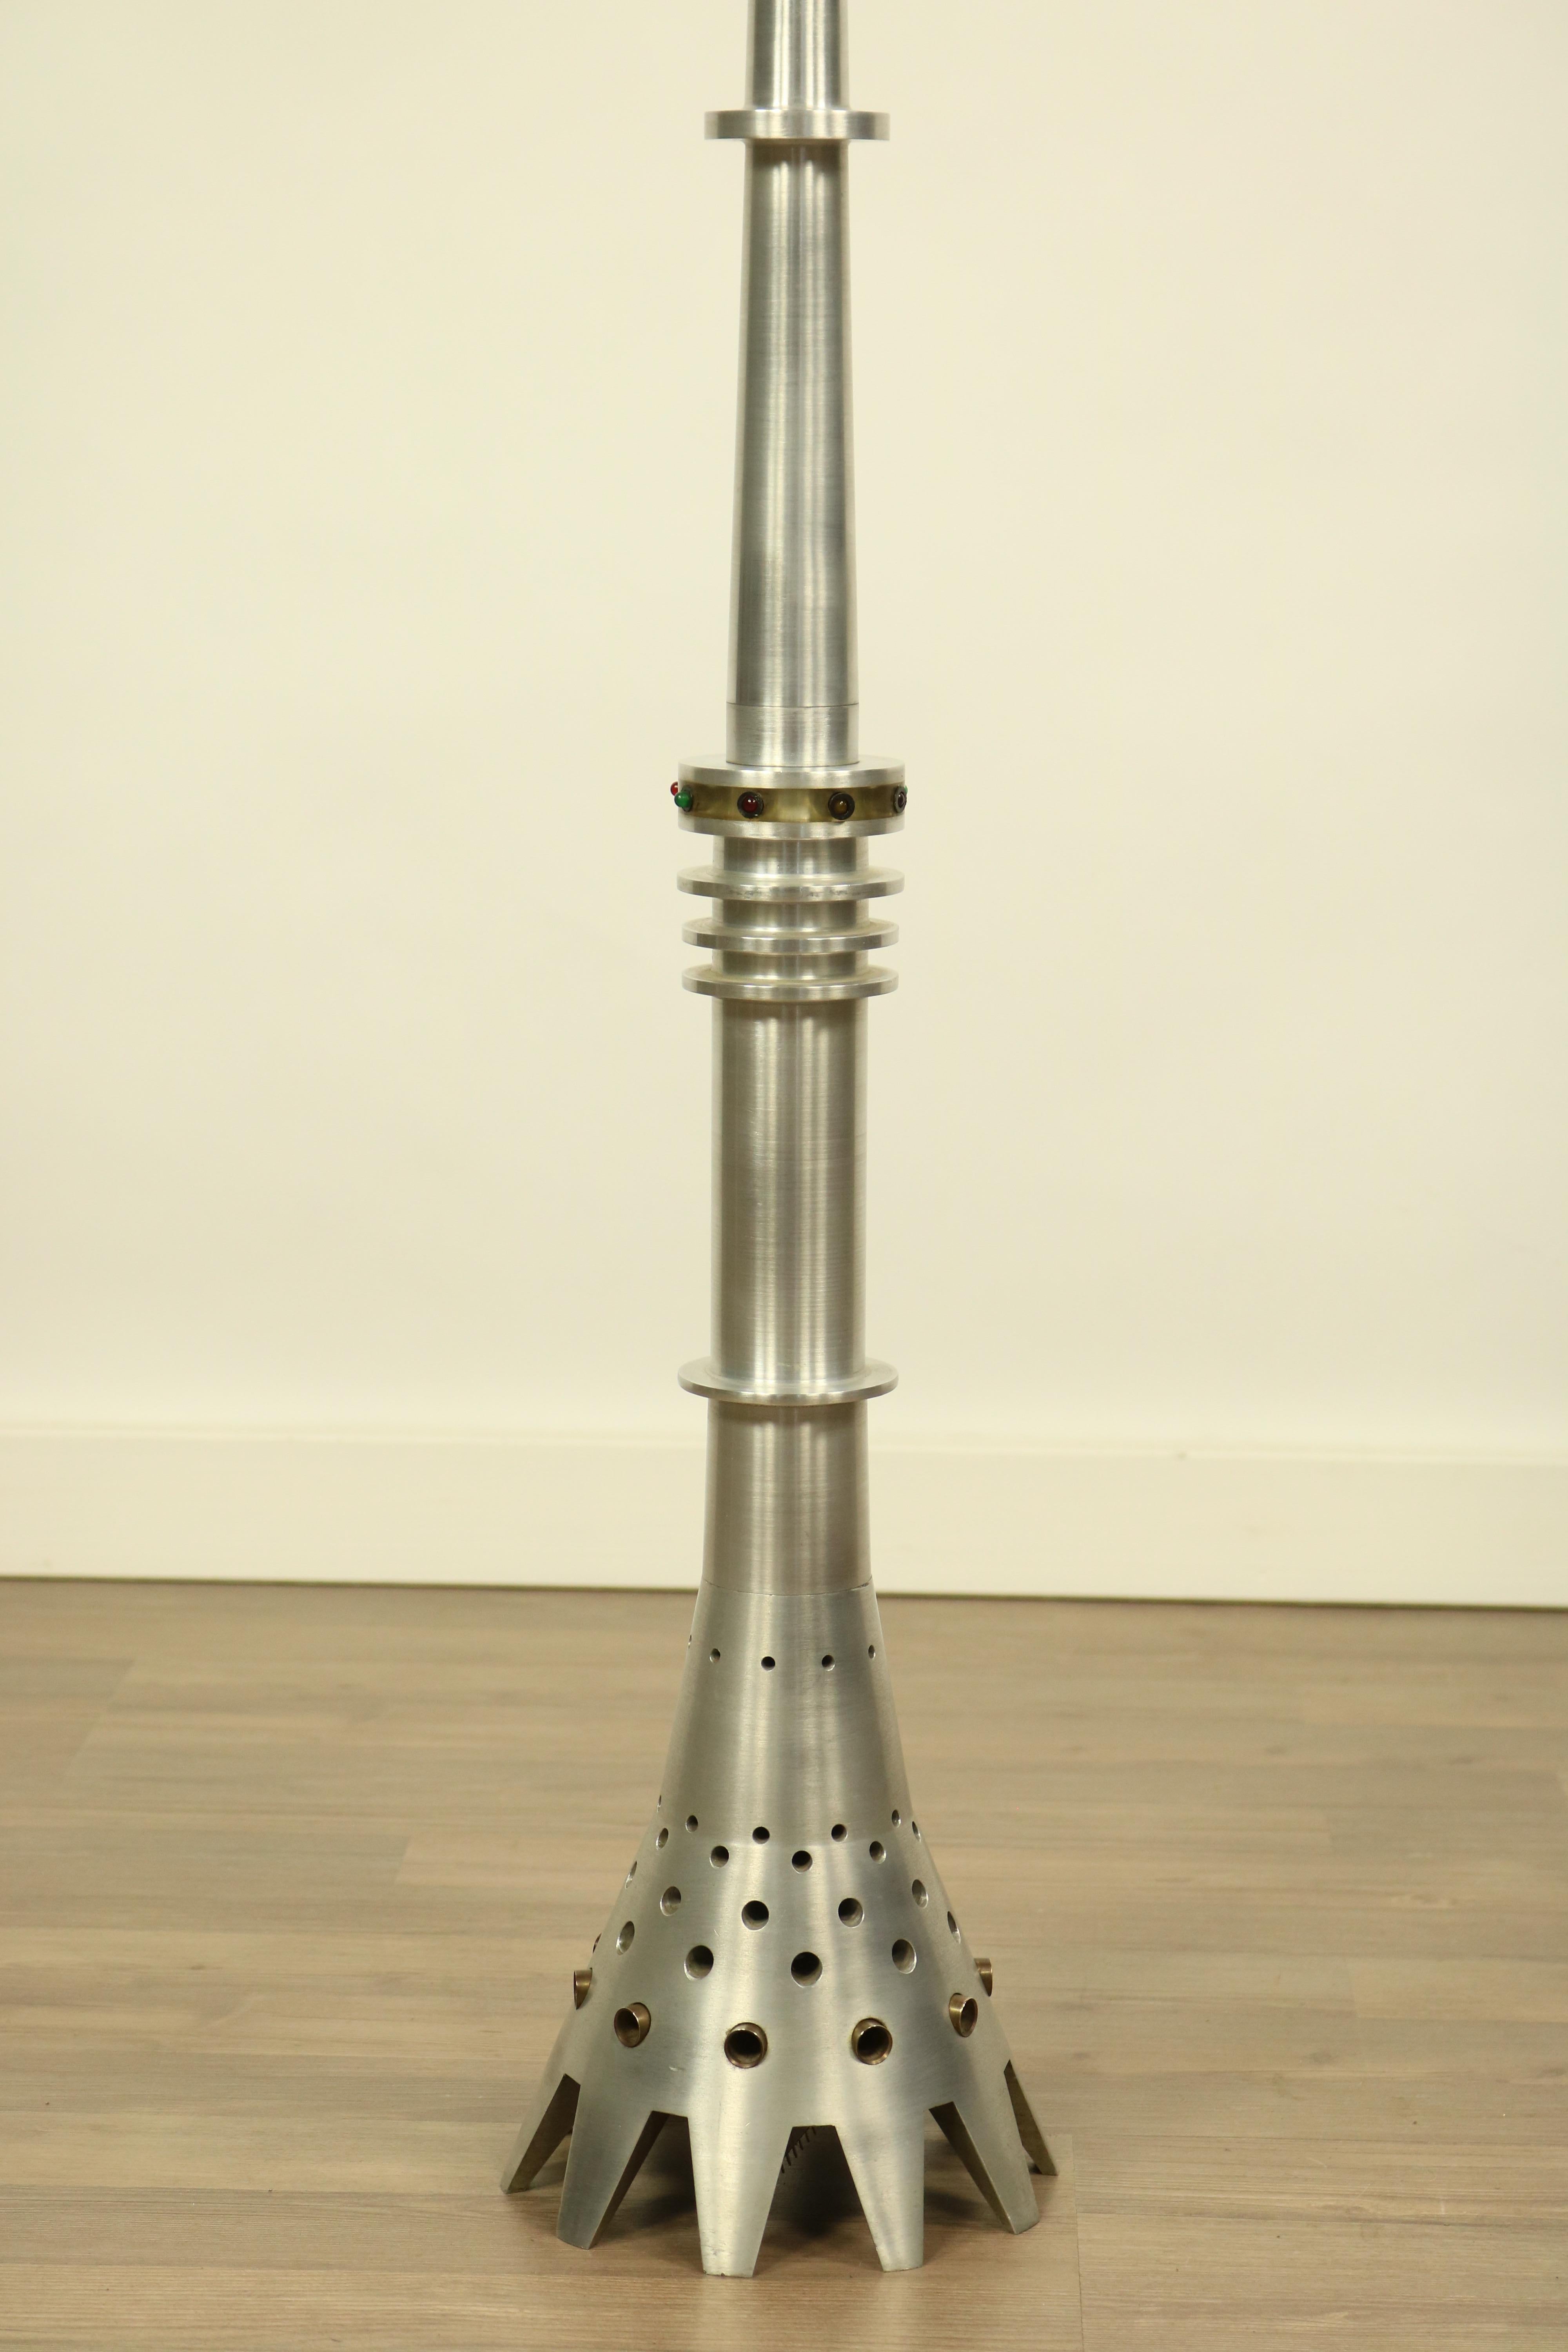 Aluminum model of the Moscow TV tower, at an incredible height of 66 1/2''.
The model is equipped with some LEDs and cables but we could not test the function, 
otherwise the general condition is very fine.
Weight 6 kg / 13.2 lb.
 
 